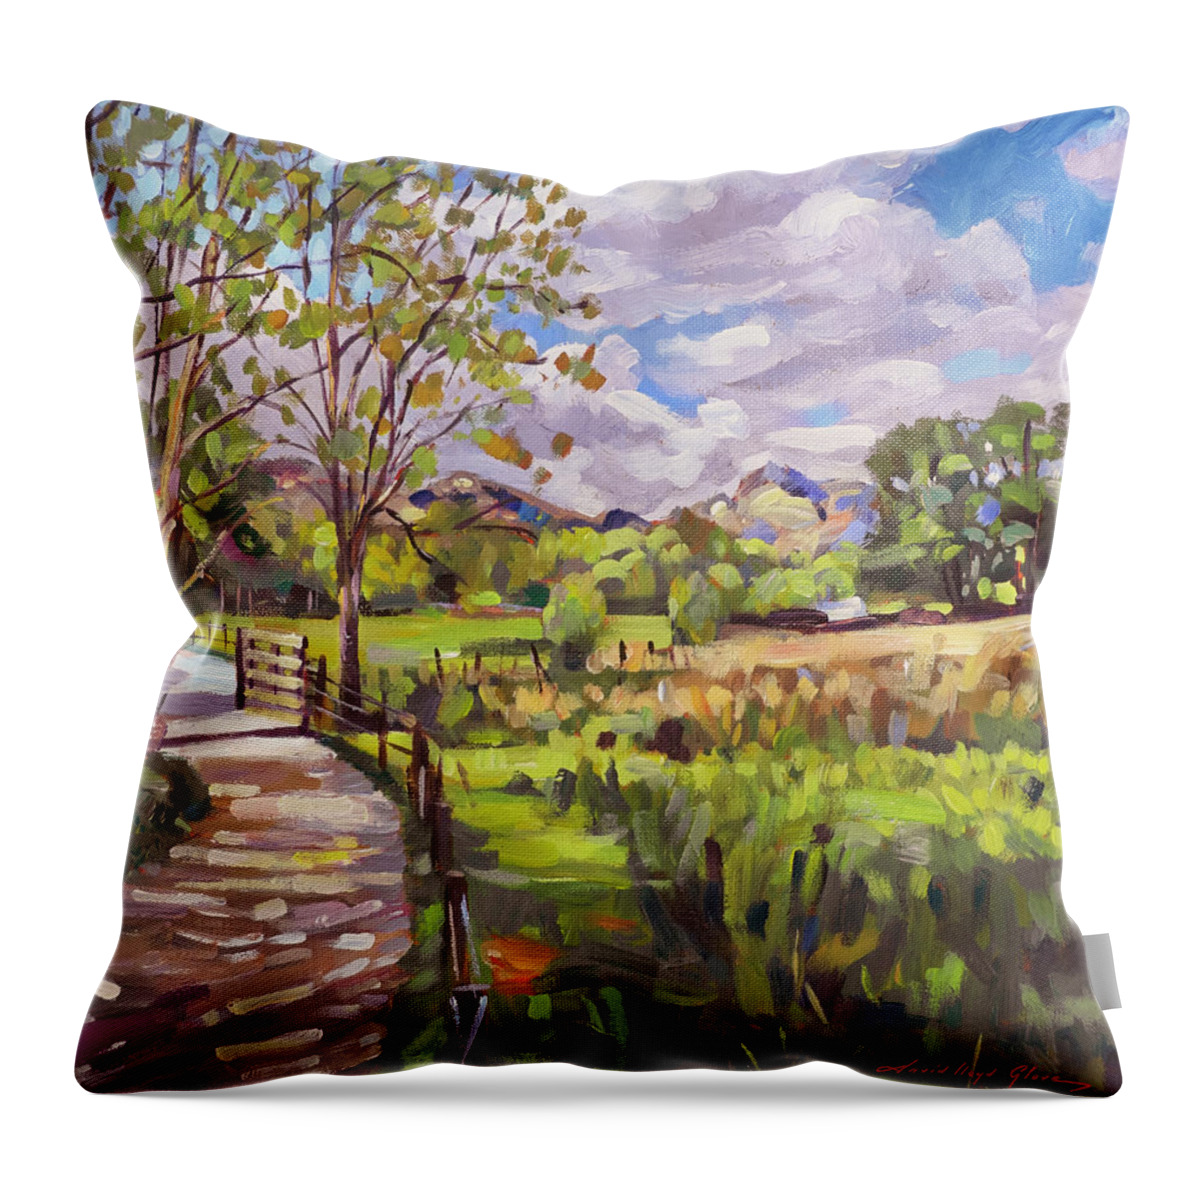 Landscape Throw Pillow featuring the painting The Farm Gate by David Lloyd Glover